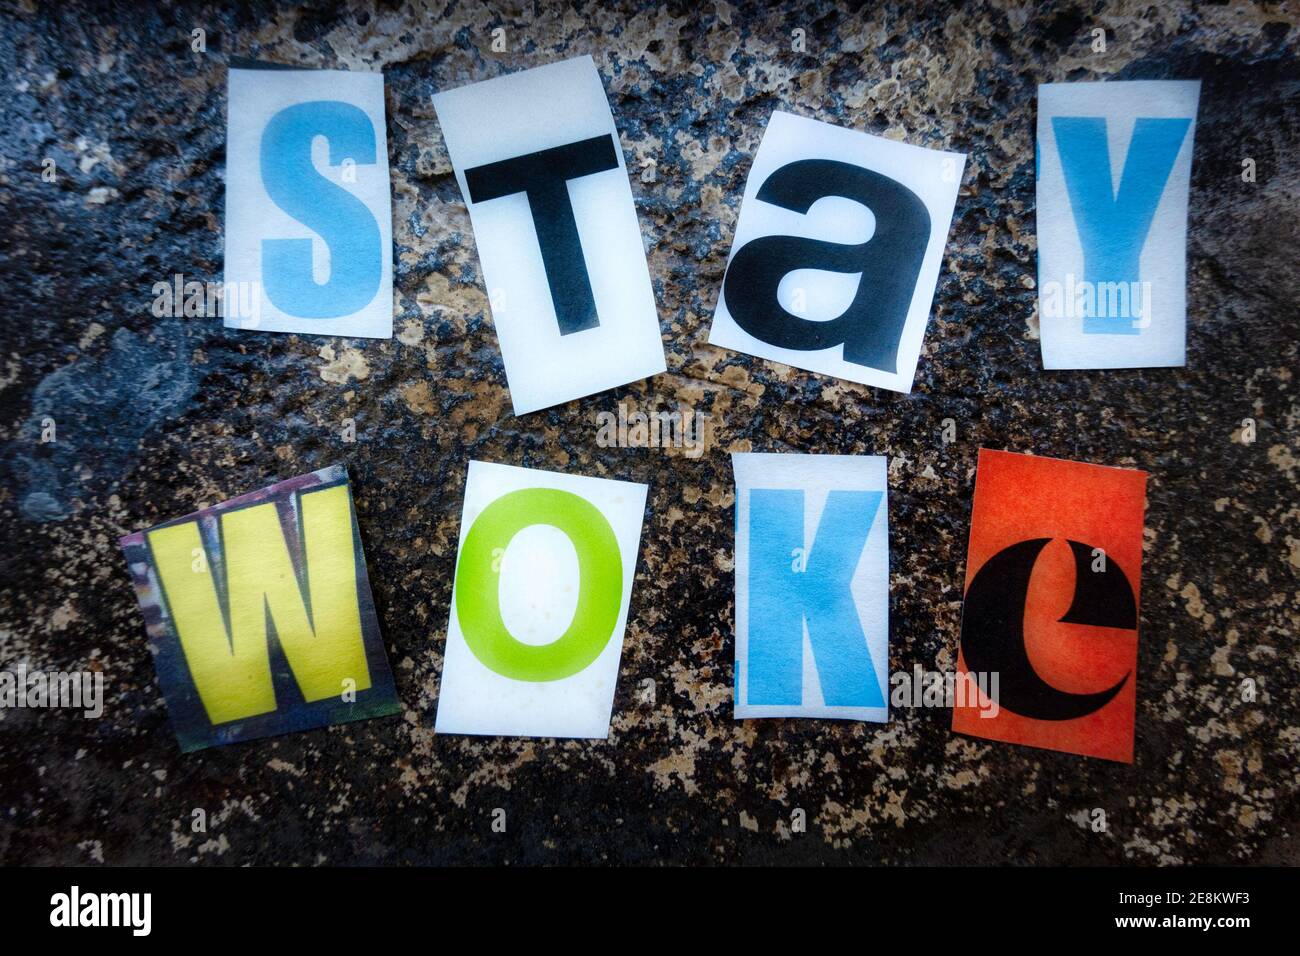 TheTerm 'Stay WOKE' using cut-out paper letters in the ransom note effect typography Stock Photo